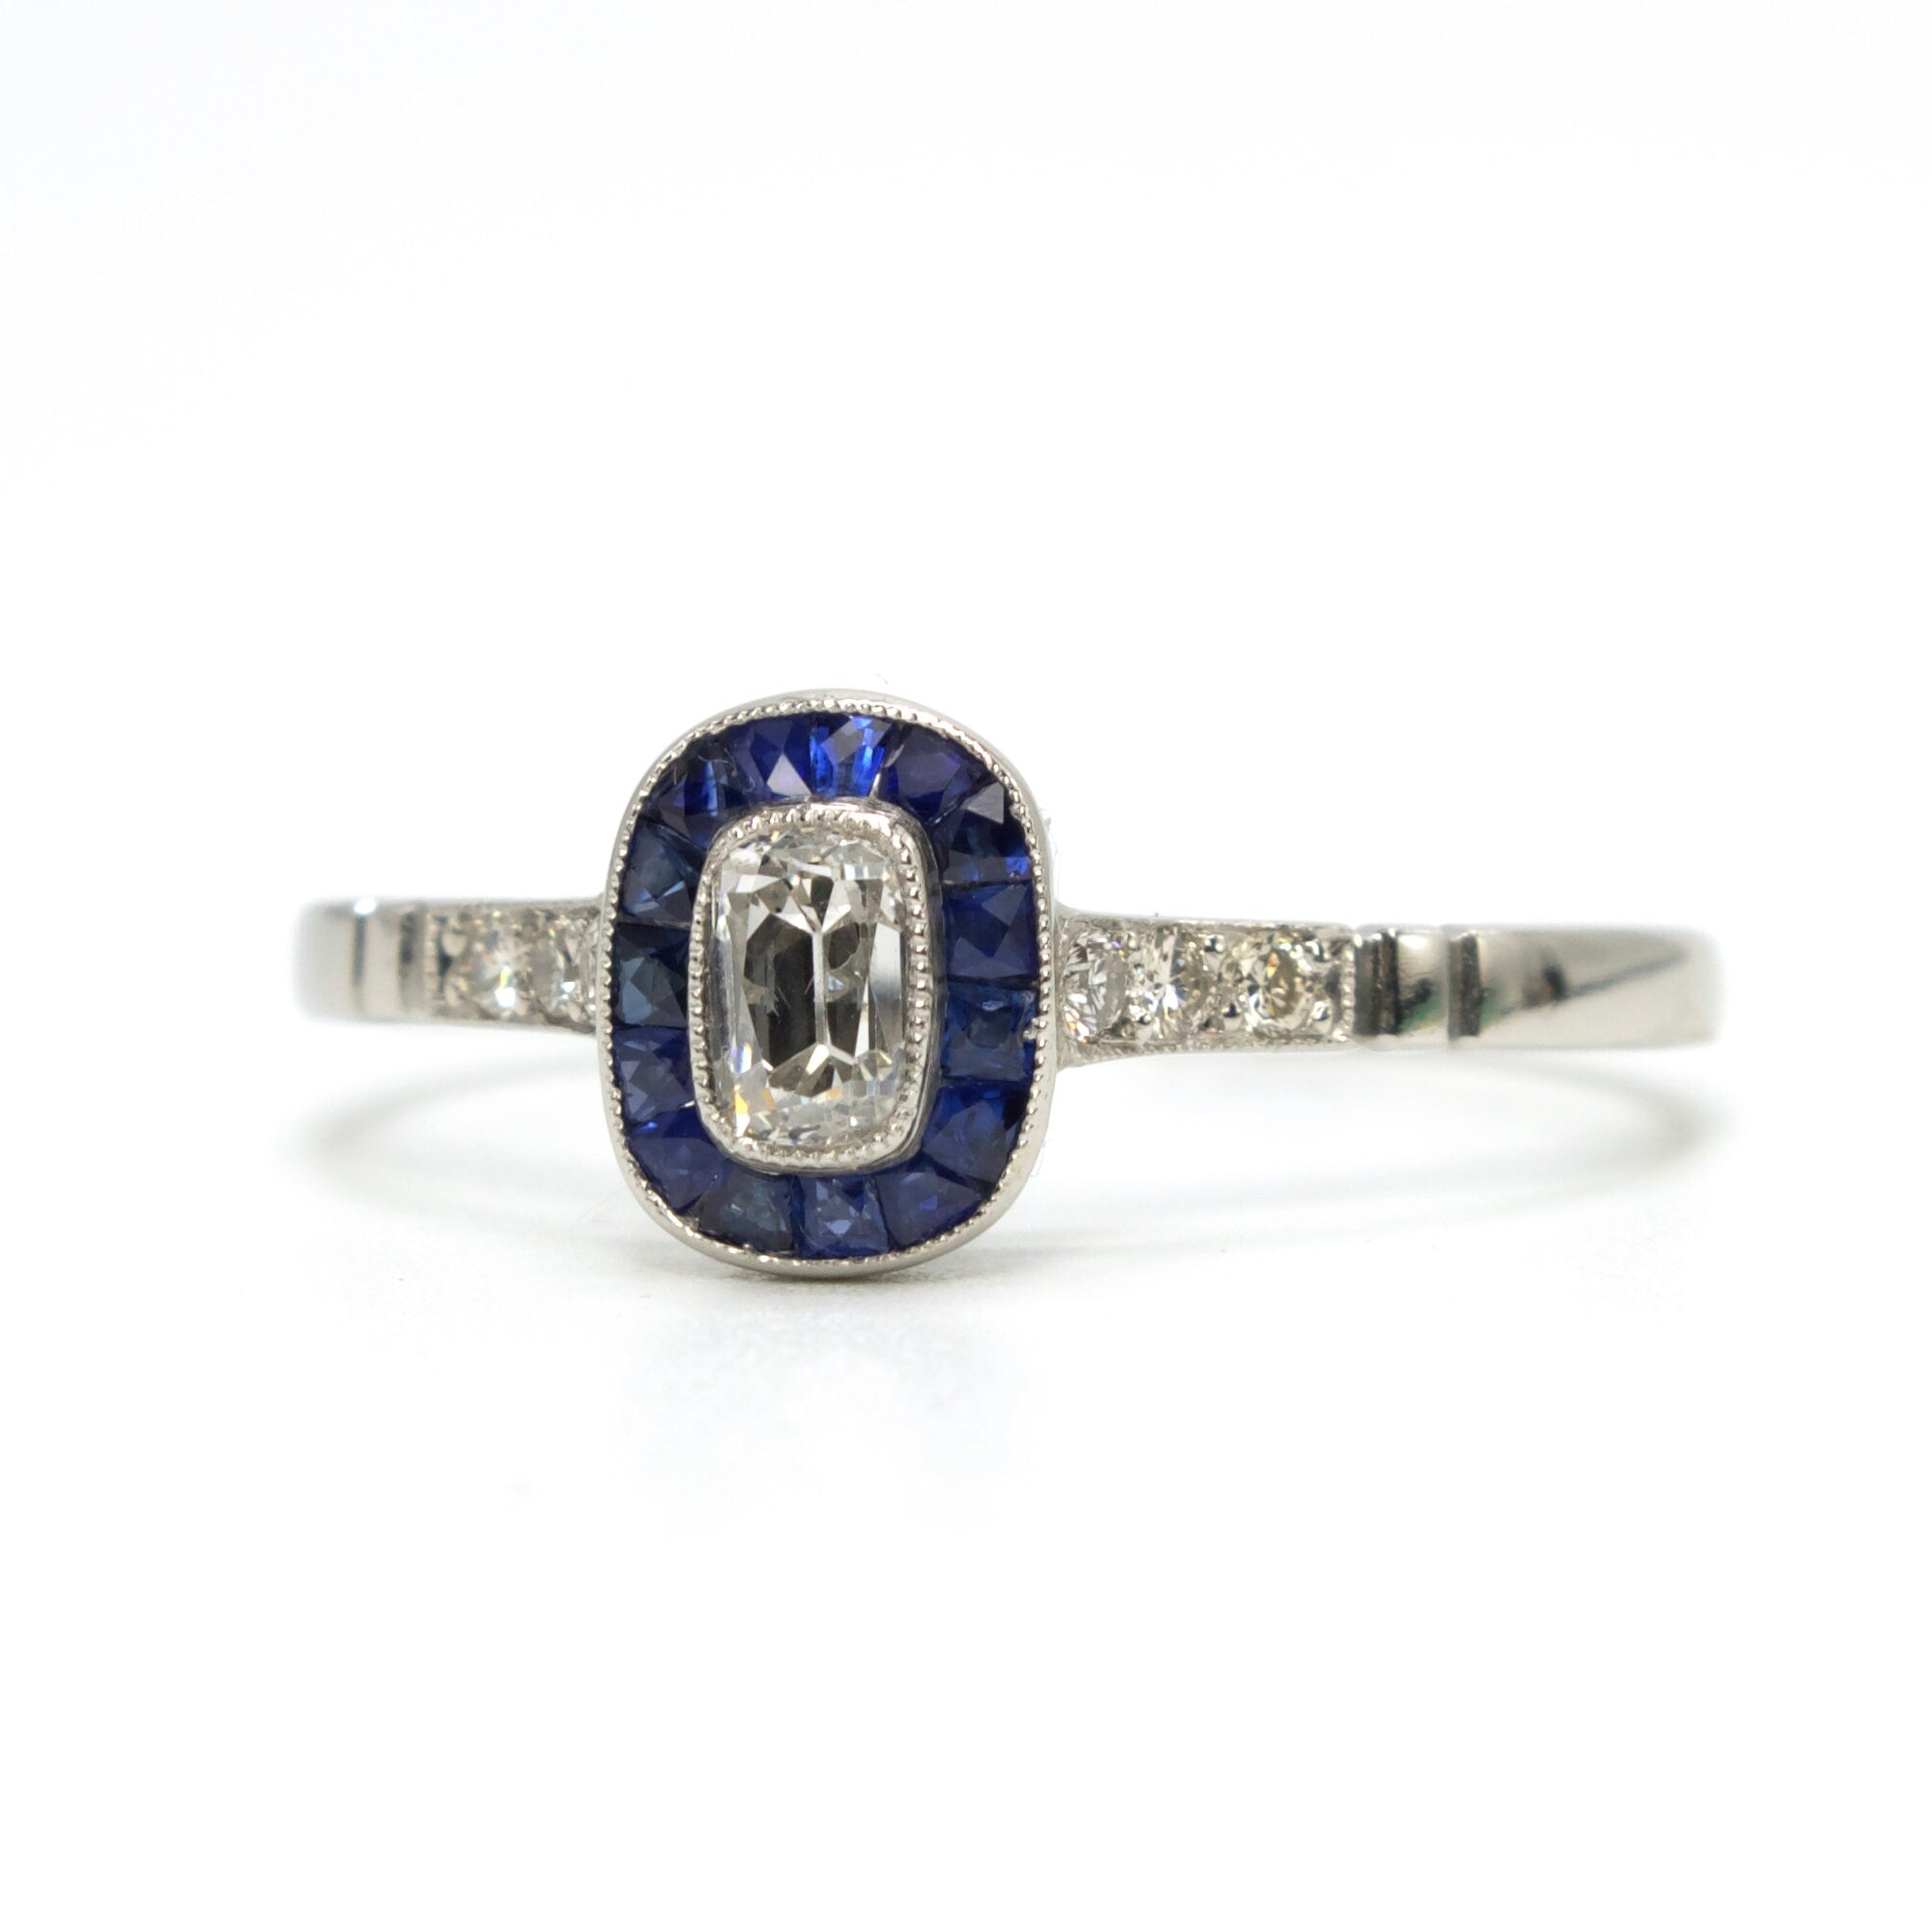 Rare and Unusual Antique Elongated Cushion Cut Diamond Target Ring with French Cut Sapphire Halo in Platinum